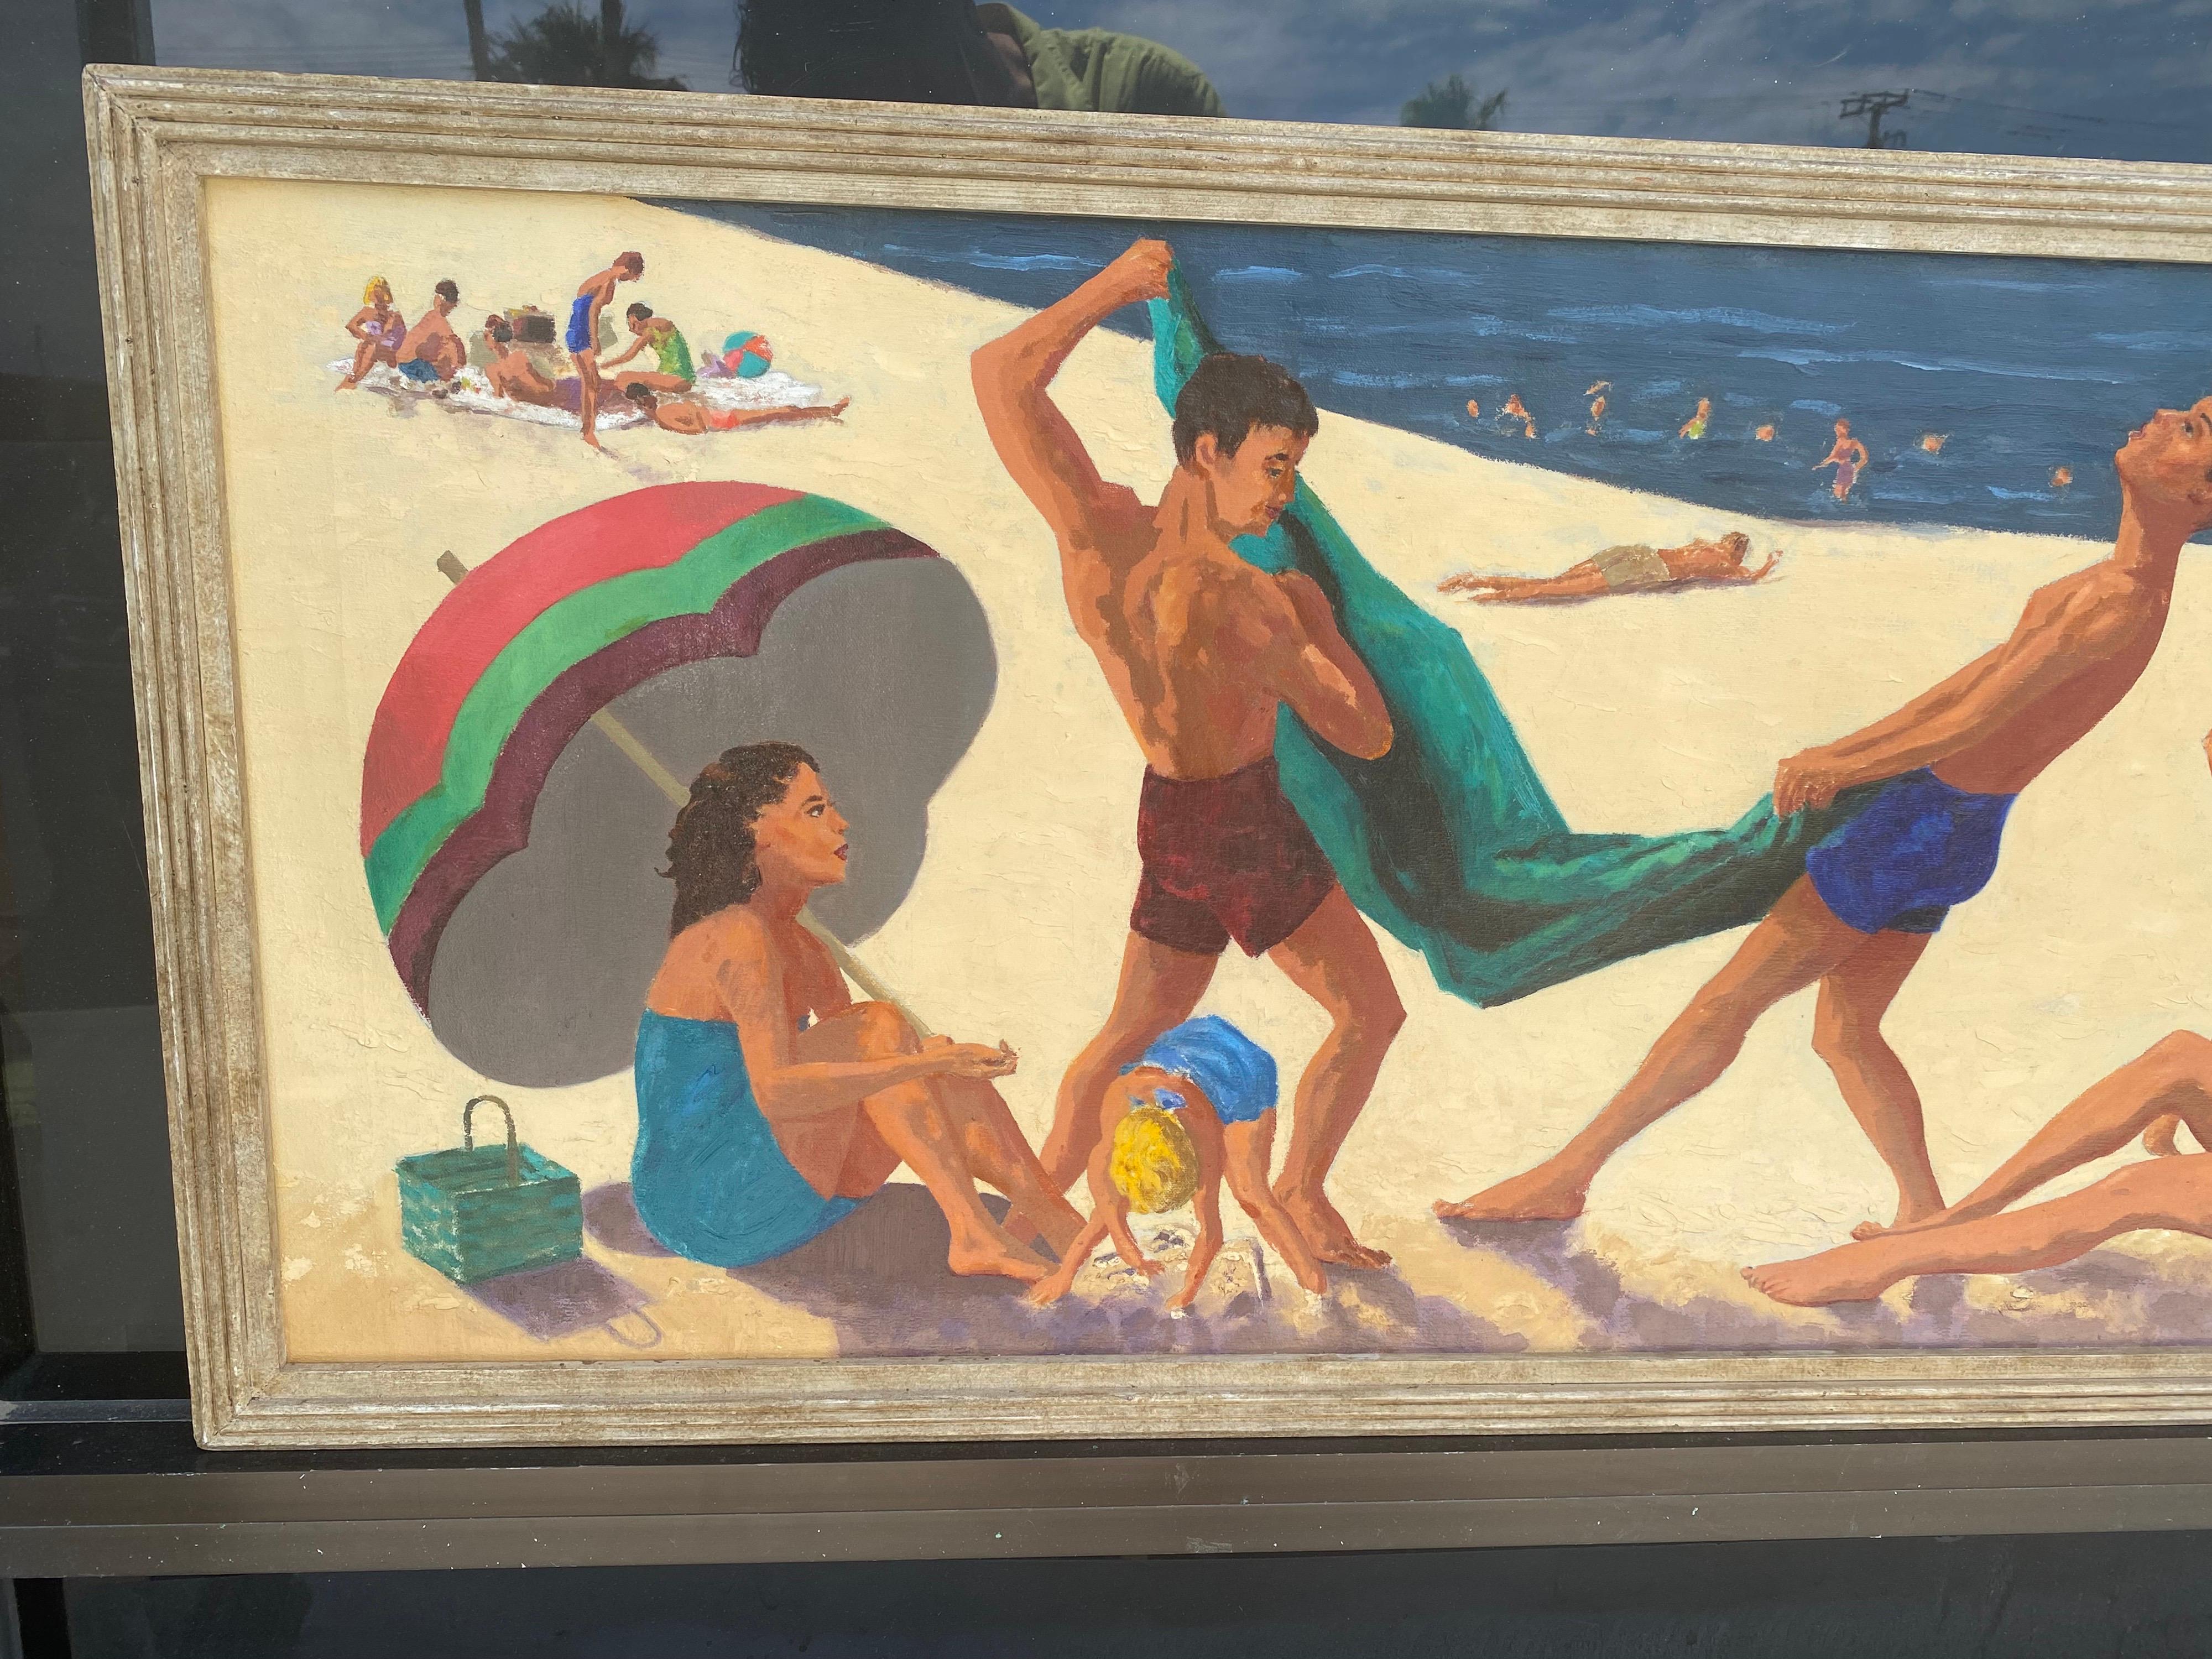 This wonderful 1955 original painting came from a very upscale estate in San Diego California. It shows a fun beach scene of friends frolicking on the beach. Really unique original mid century paintings are getting hard to fine and this one has been